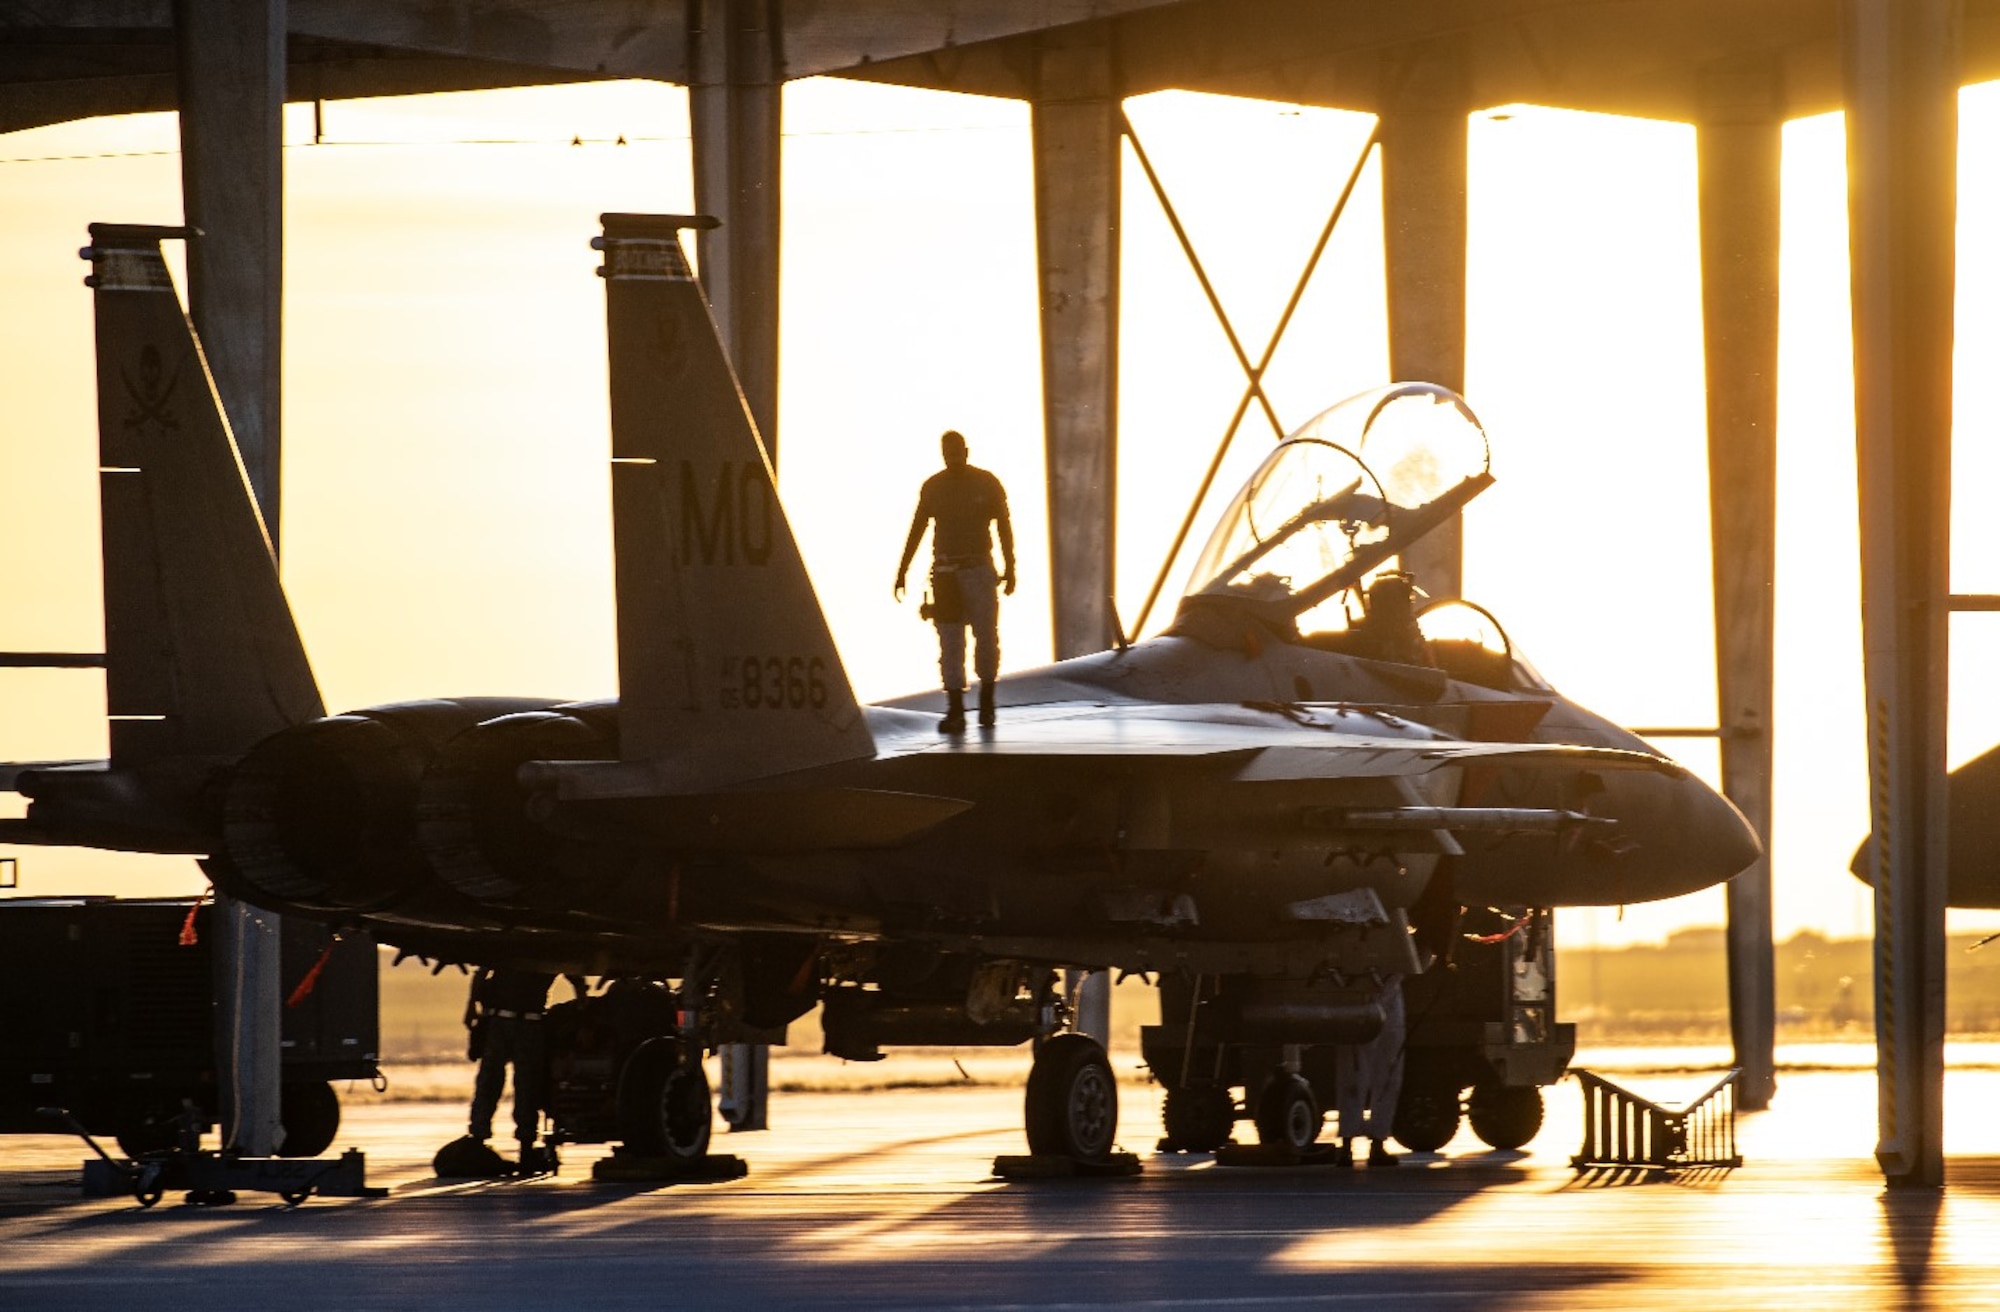 An Airman from Mountain Home Air Force Base, Idaho, surveys an F-15SG Strike Eagle April 28, 2021, on the Mountain Home AFB flight line. The F-15 participated in exercise Rainier War, testing its ability to employ air combat capabilities during a time of potentially imminent foreign aggression.